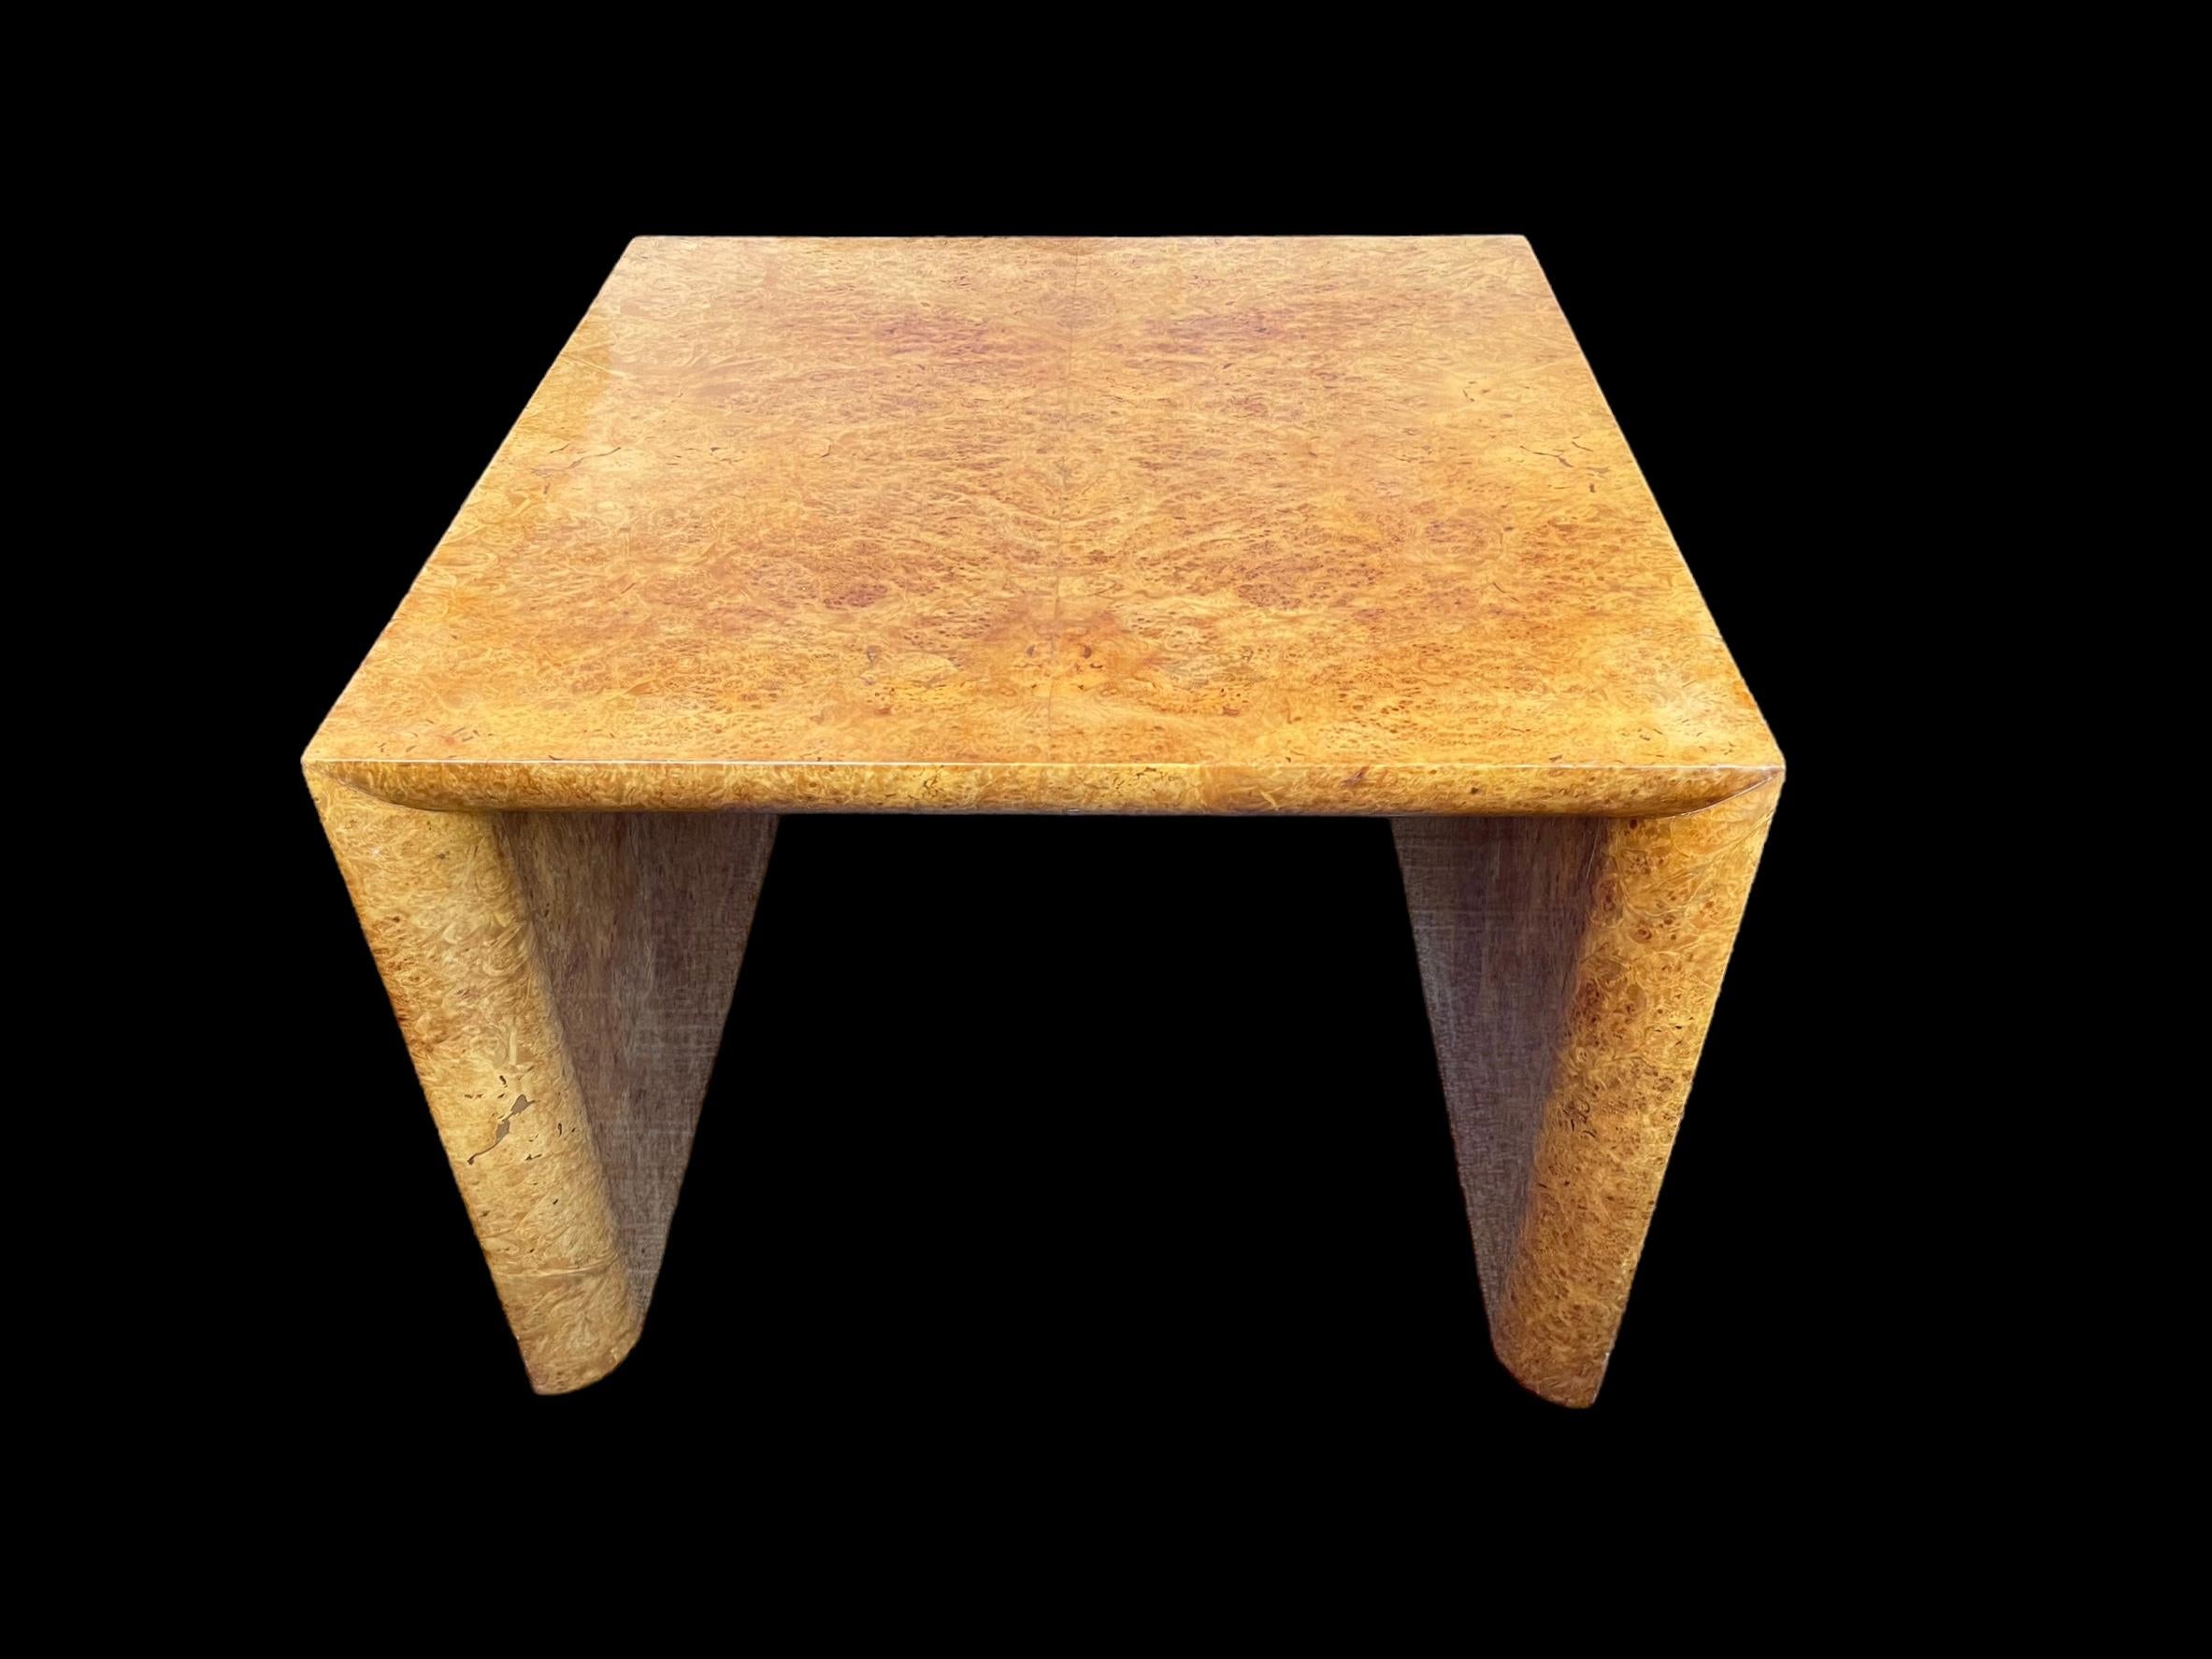 A fine and rare Art Deco Side Table in golden burr walnut. The square top with two solid sides. Very high quality and extremely heavy! 
Our restorer has over 40 years of furniture restoration experience including 15 years living at Windsor Castle